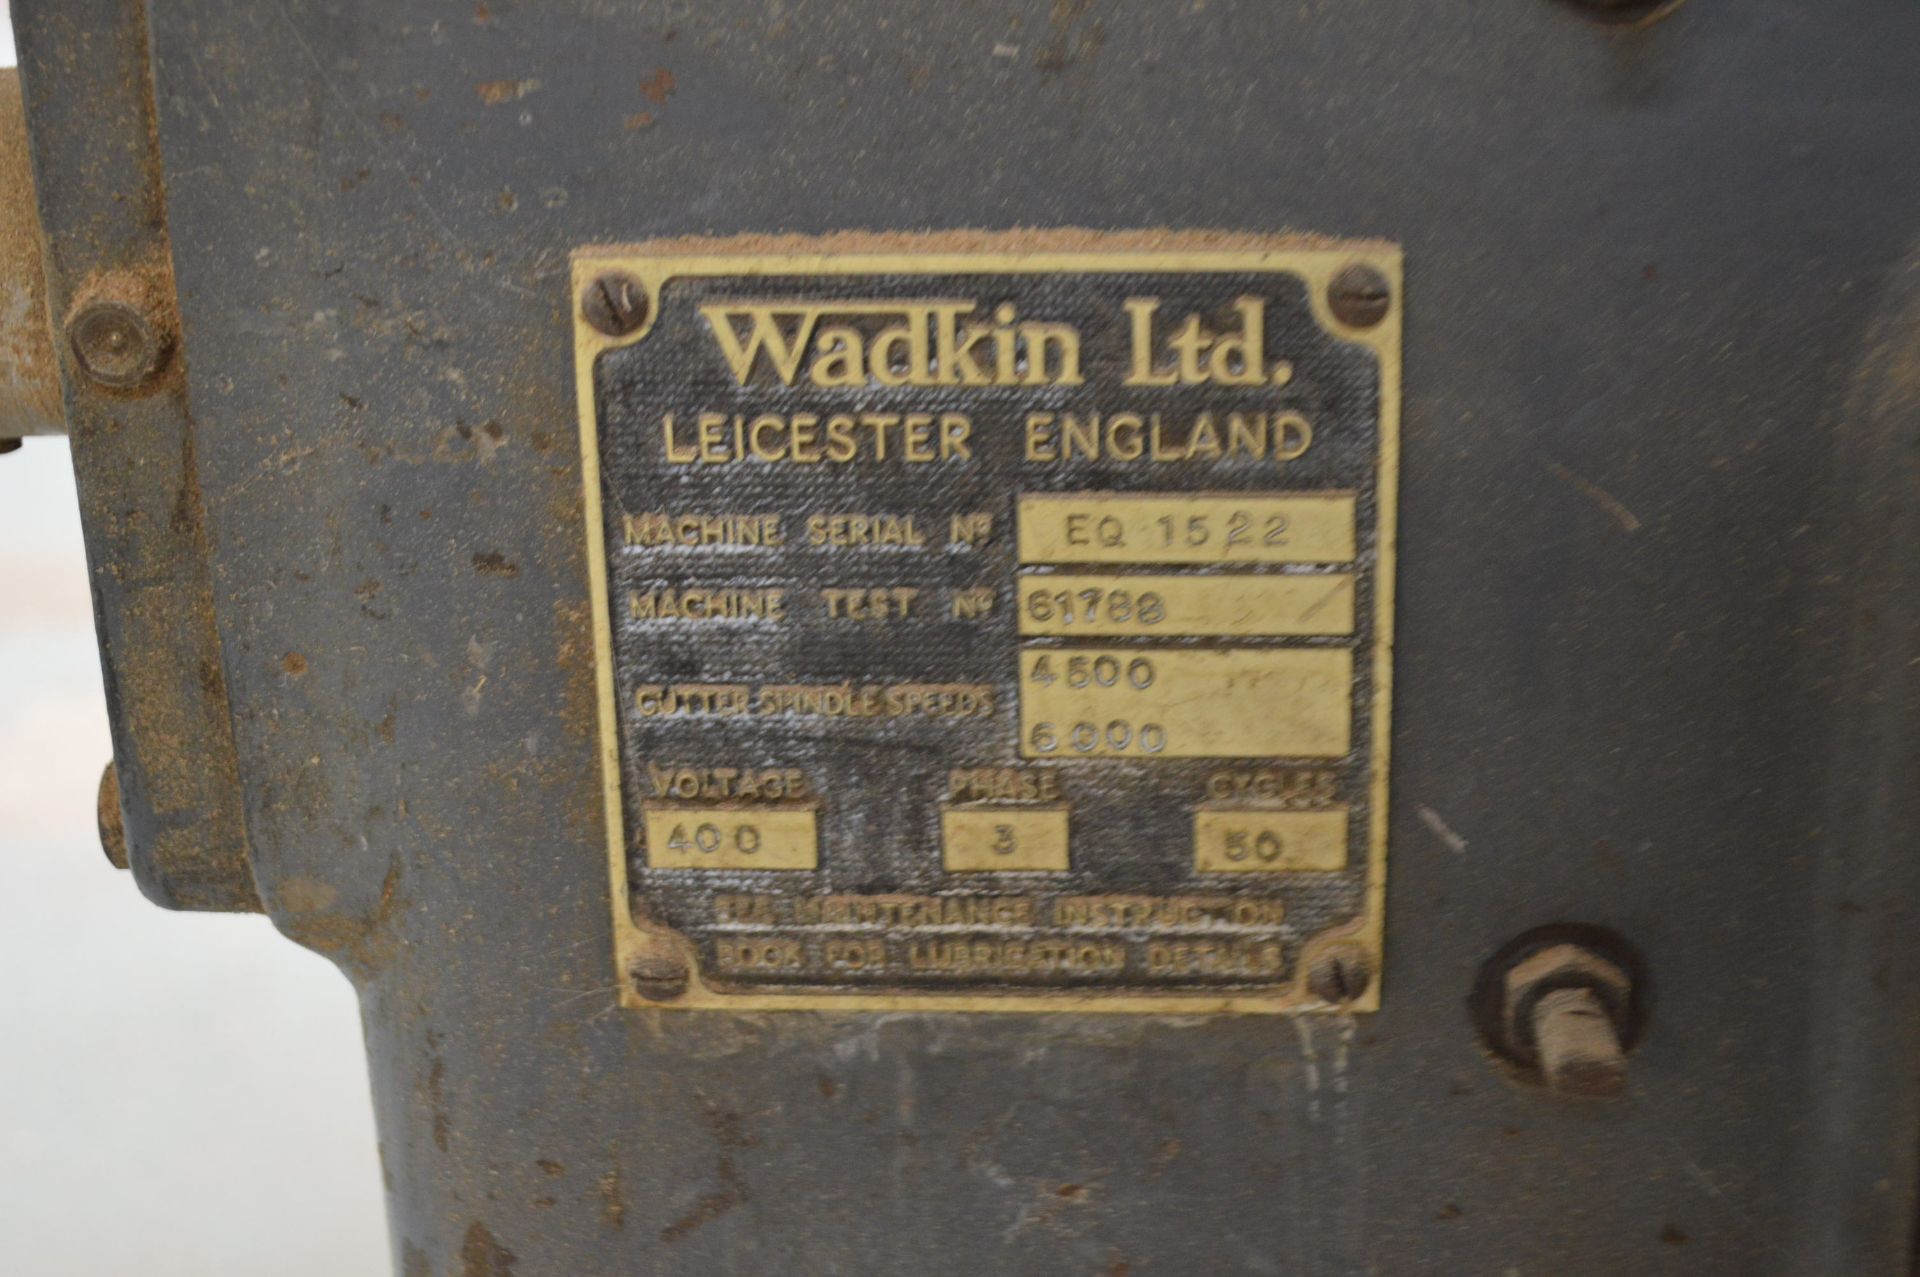 Wadkin EQ VERTICAL SPINDLE MOULDING MACHINE, serial no. 1522, test no. 61738, with power feed - Image 8 of 8